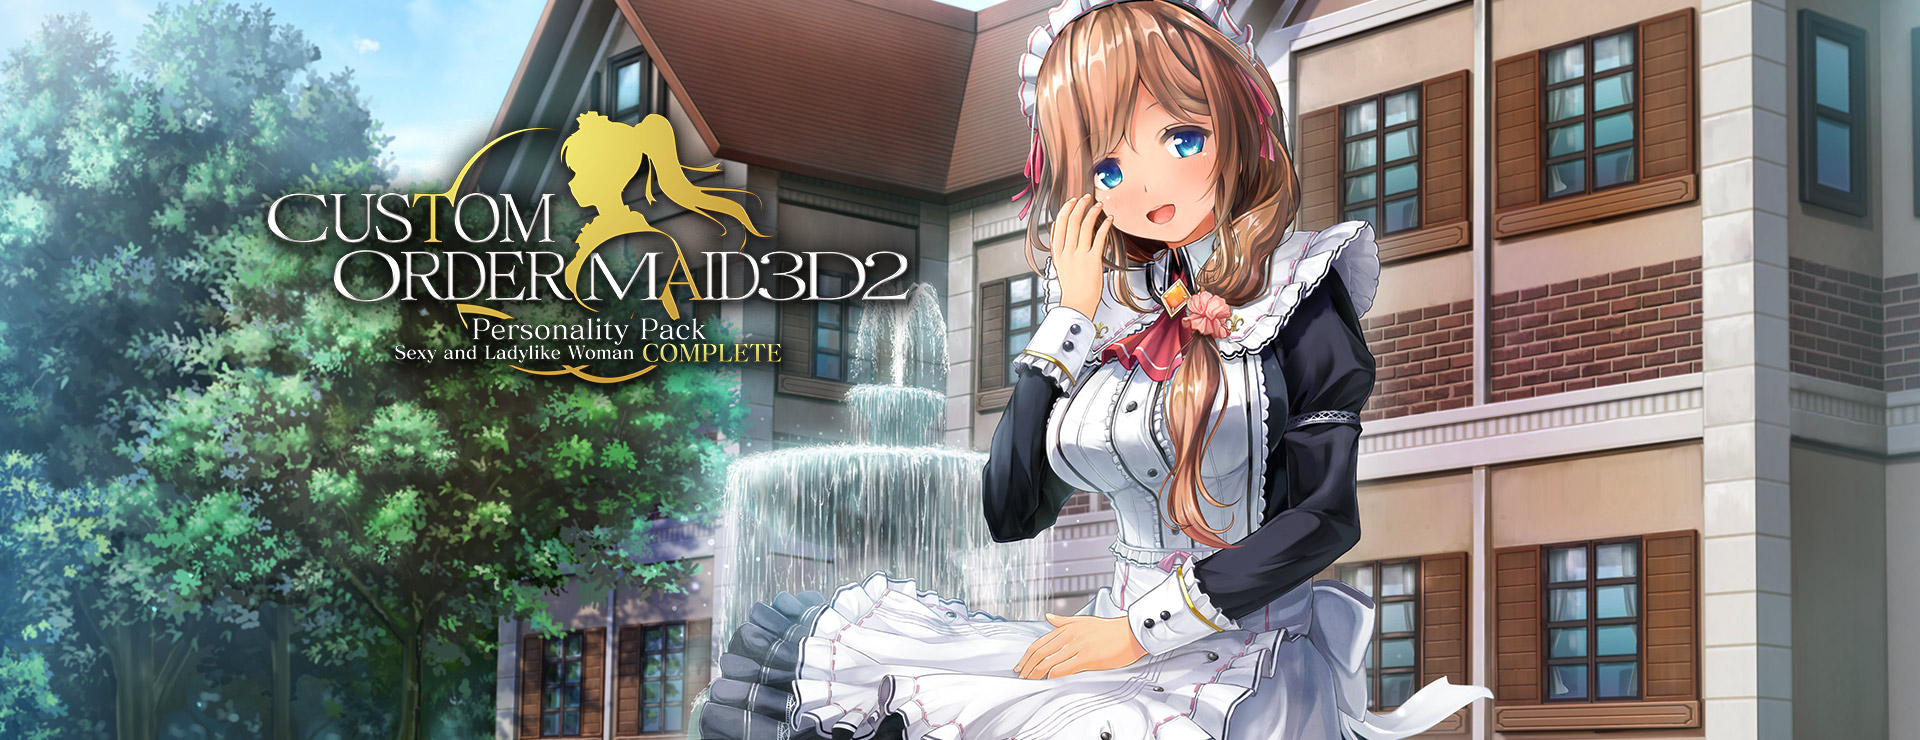 Custom Order Maid 3D 2: Sexy and Ladylike Woman Complete Bundle - Symulacja Gra